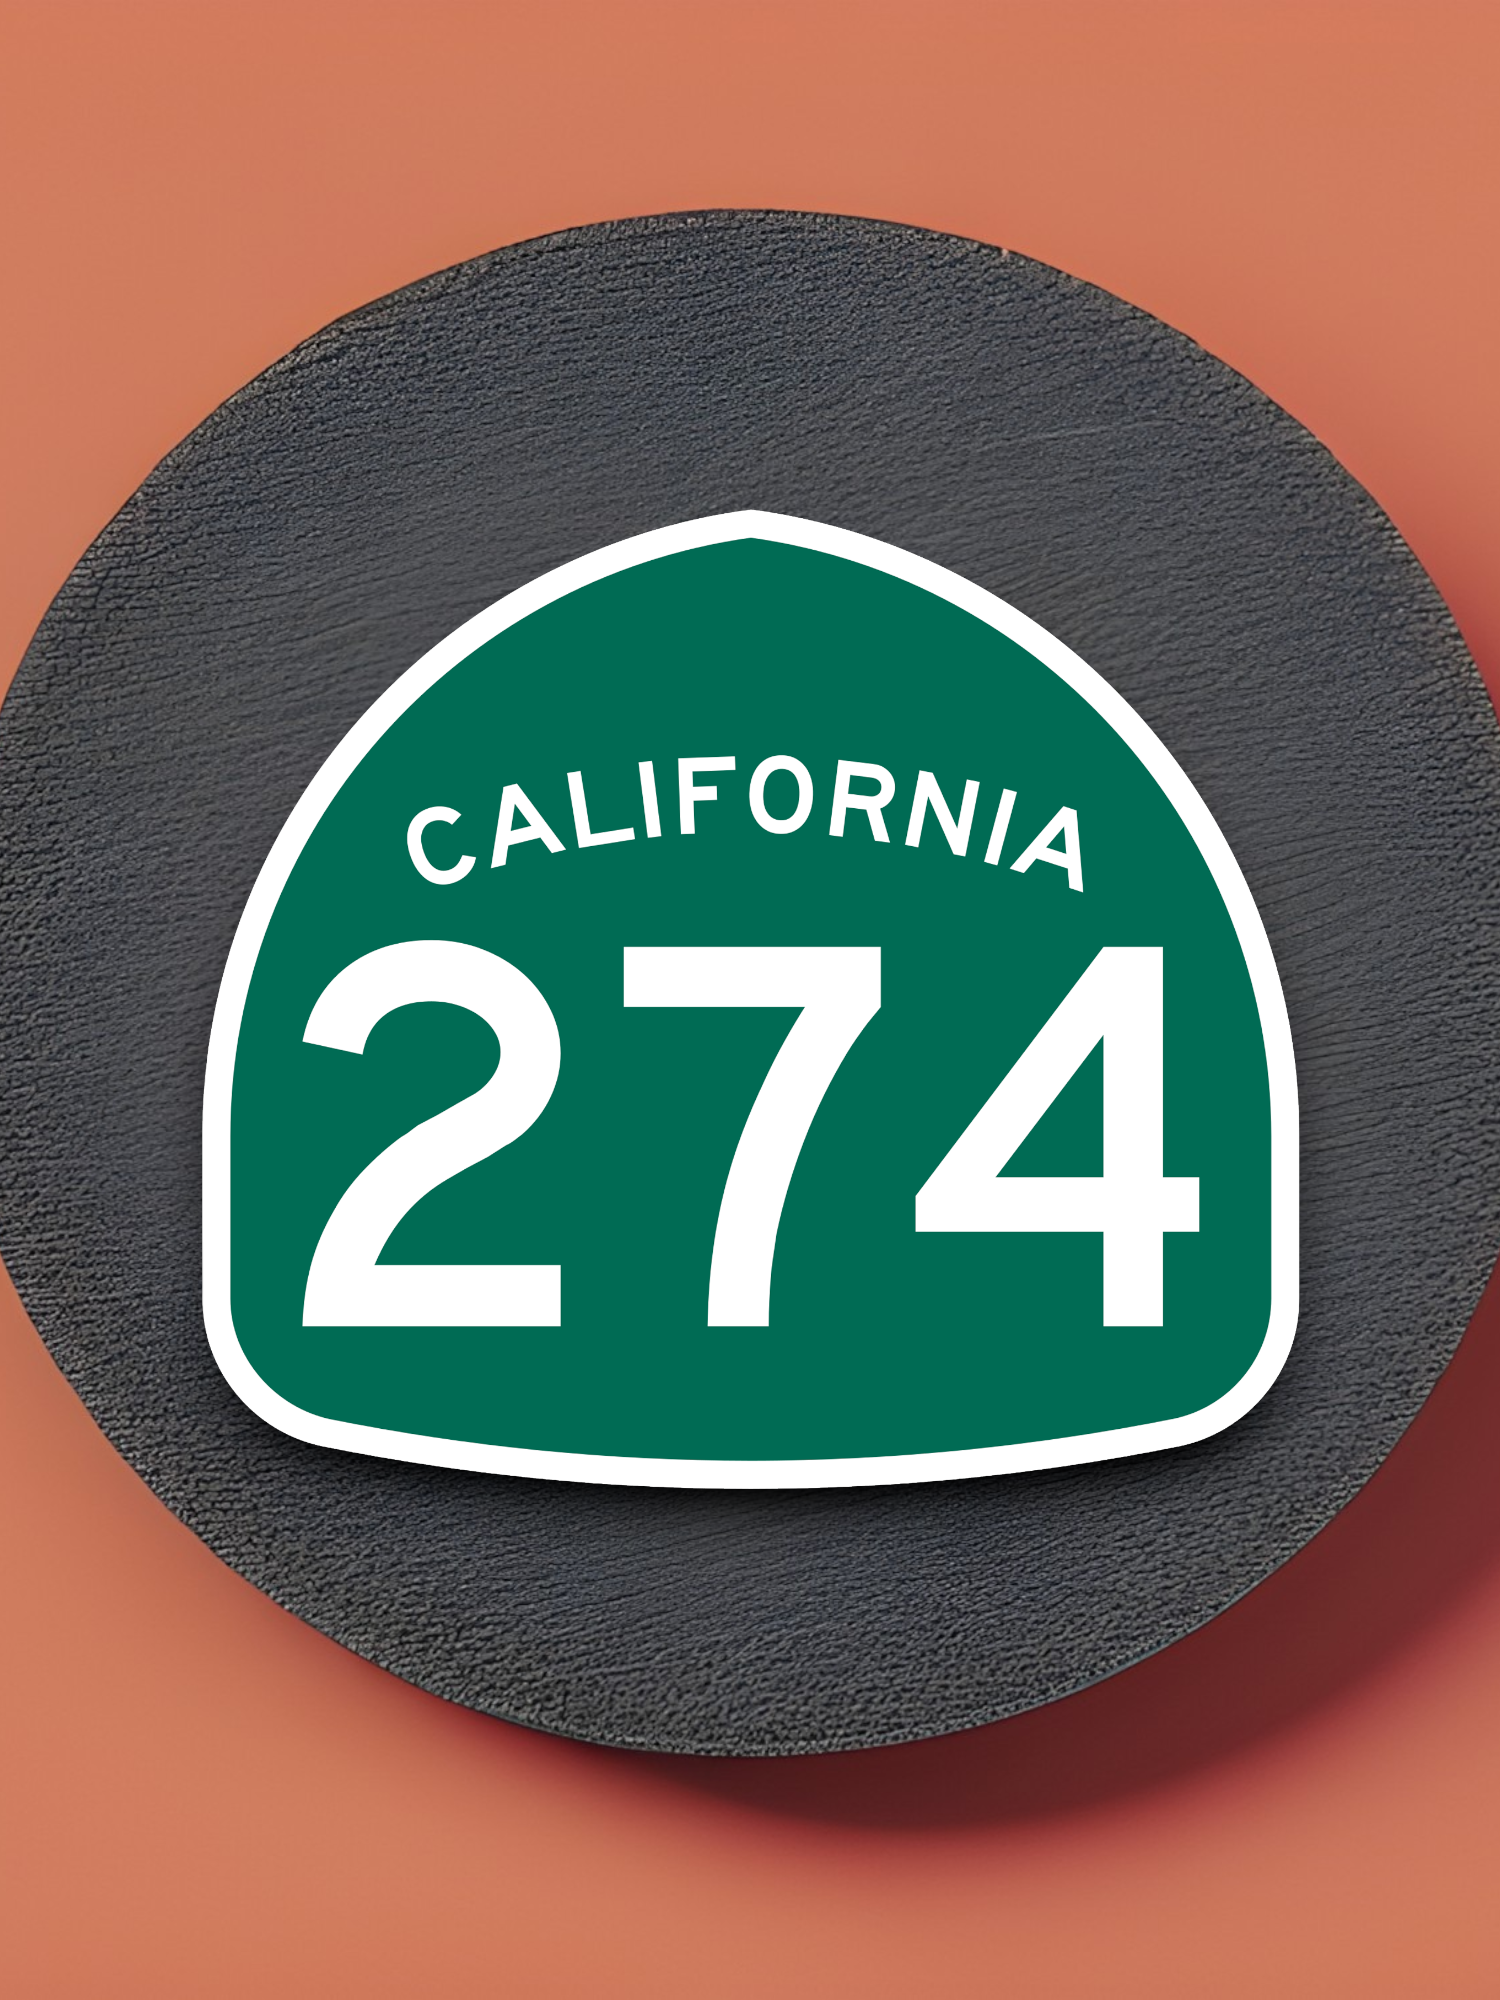 California State Route 274 Road Sign Sticker